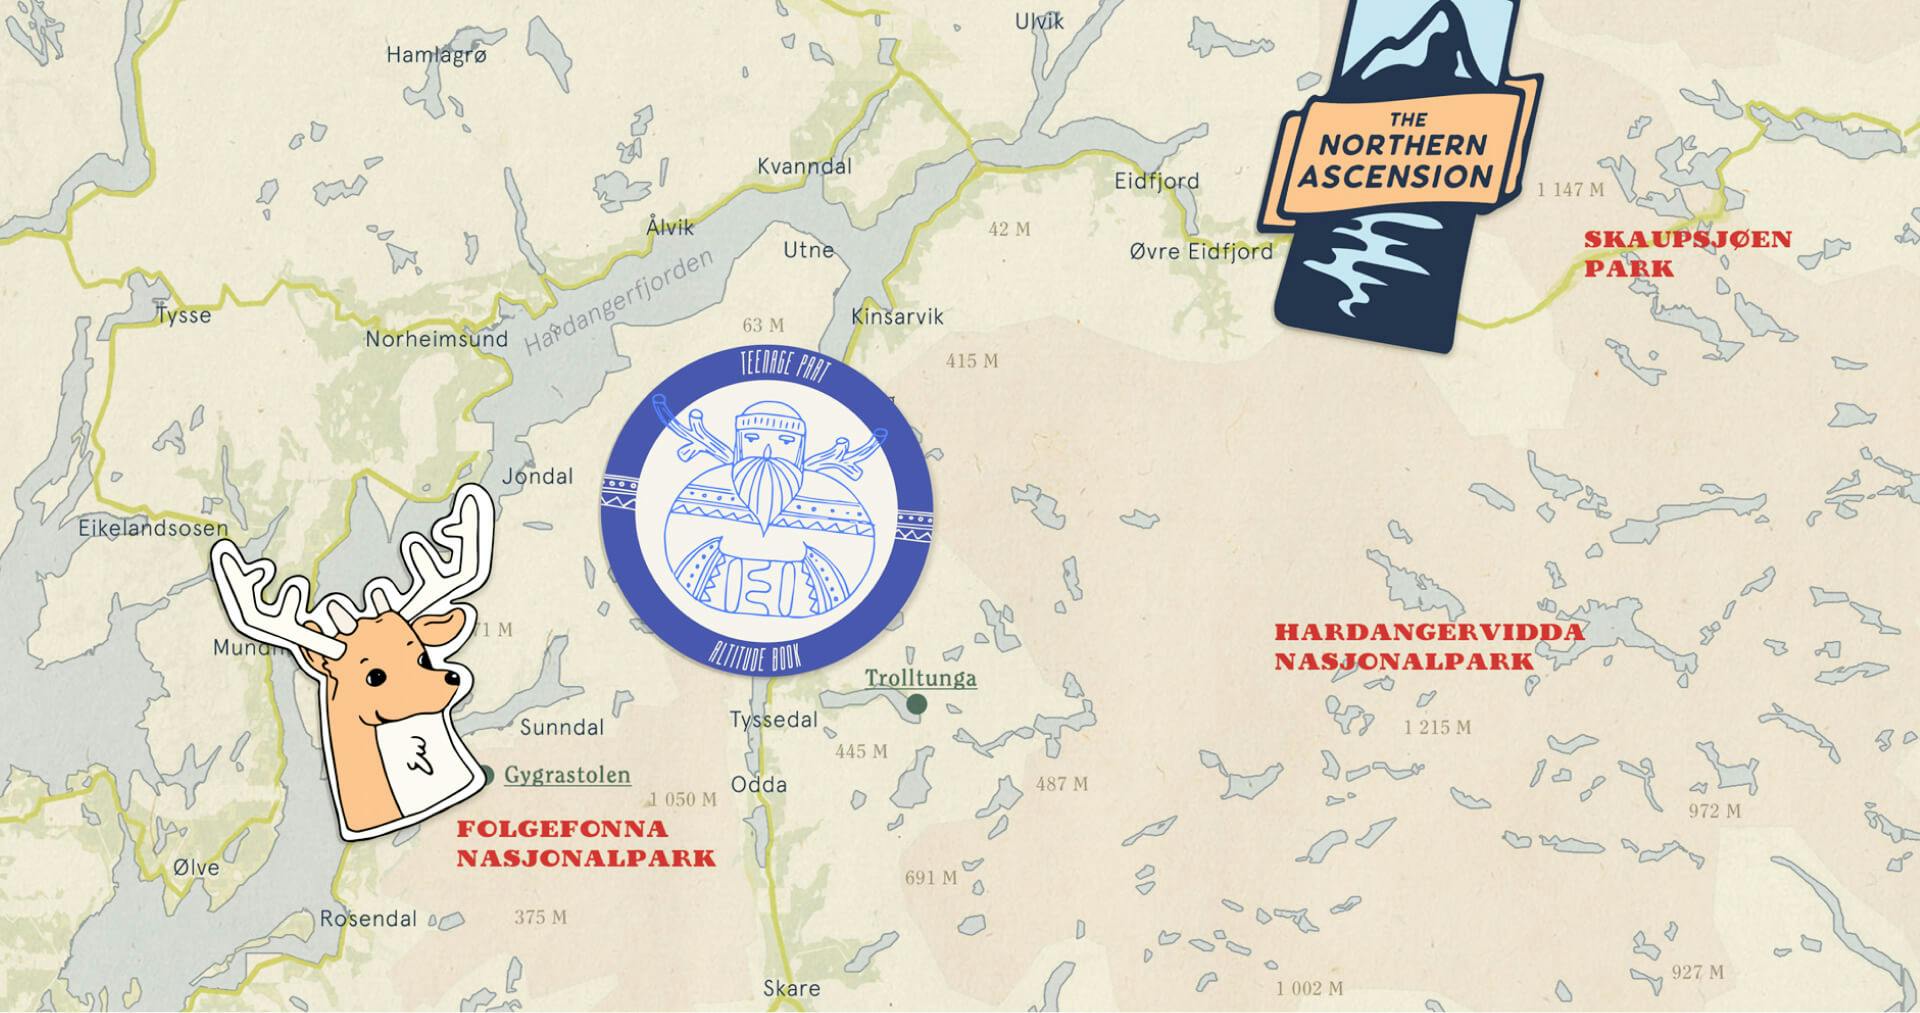 Stickers on vintage map of Norway